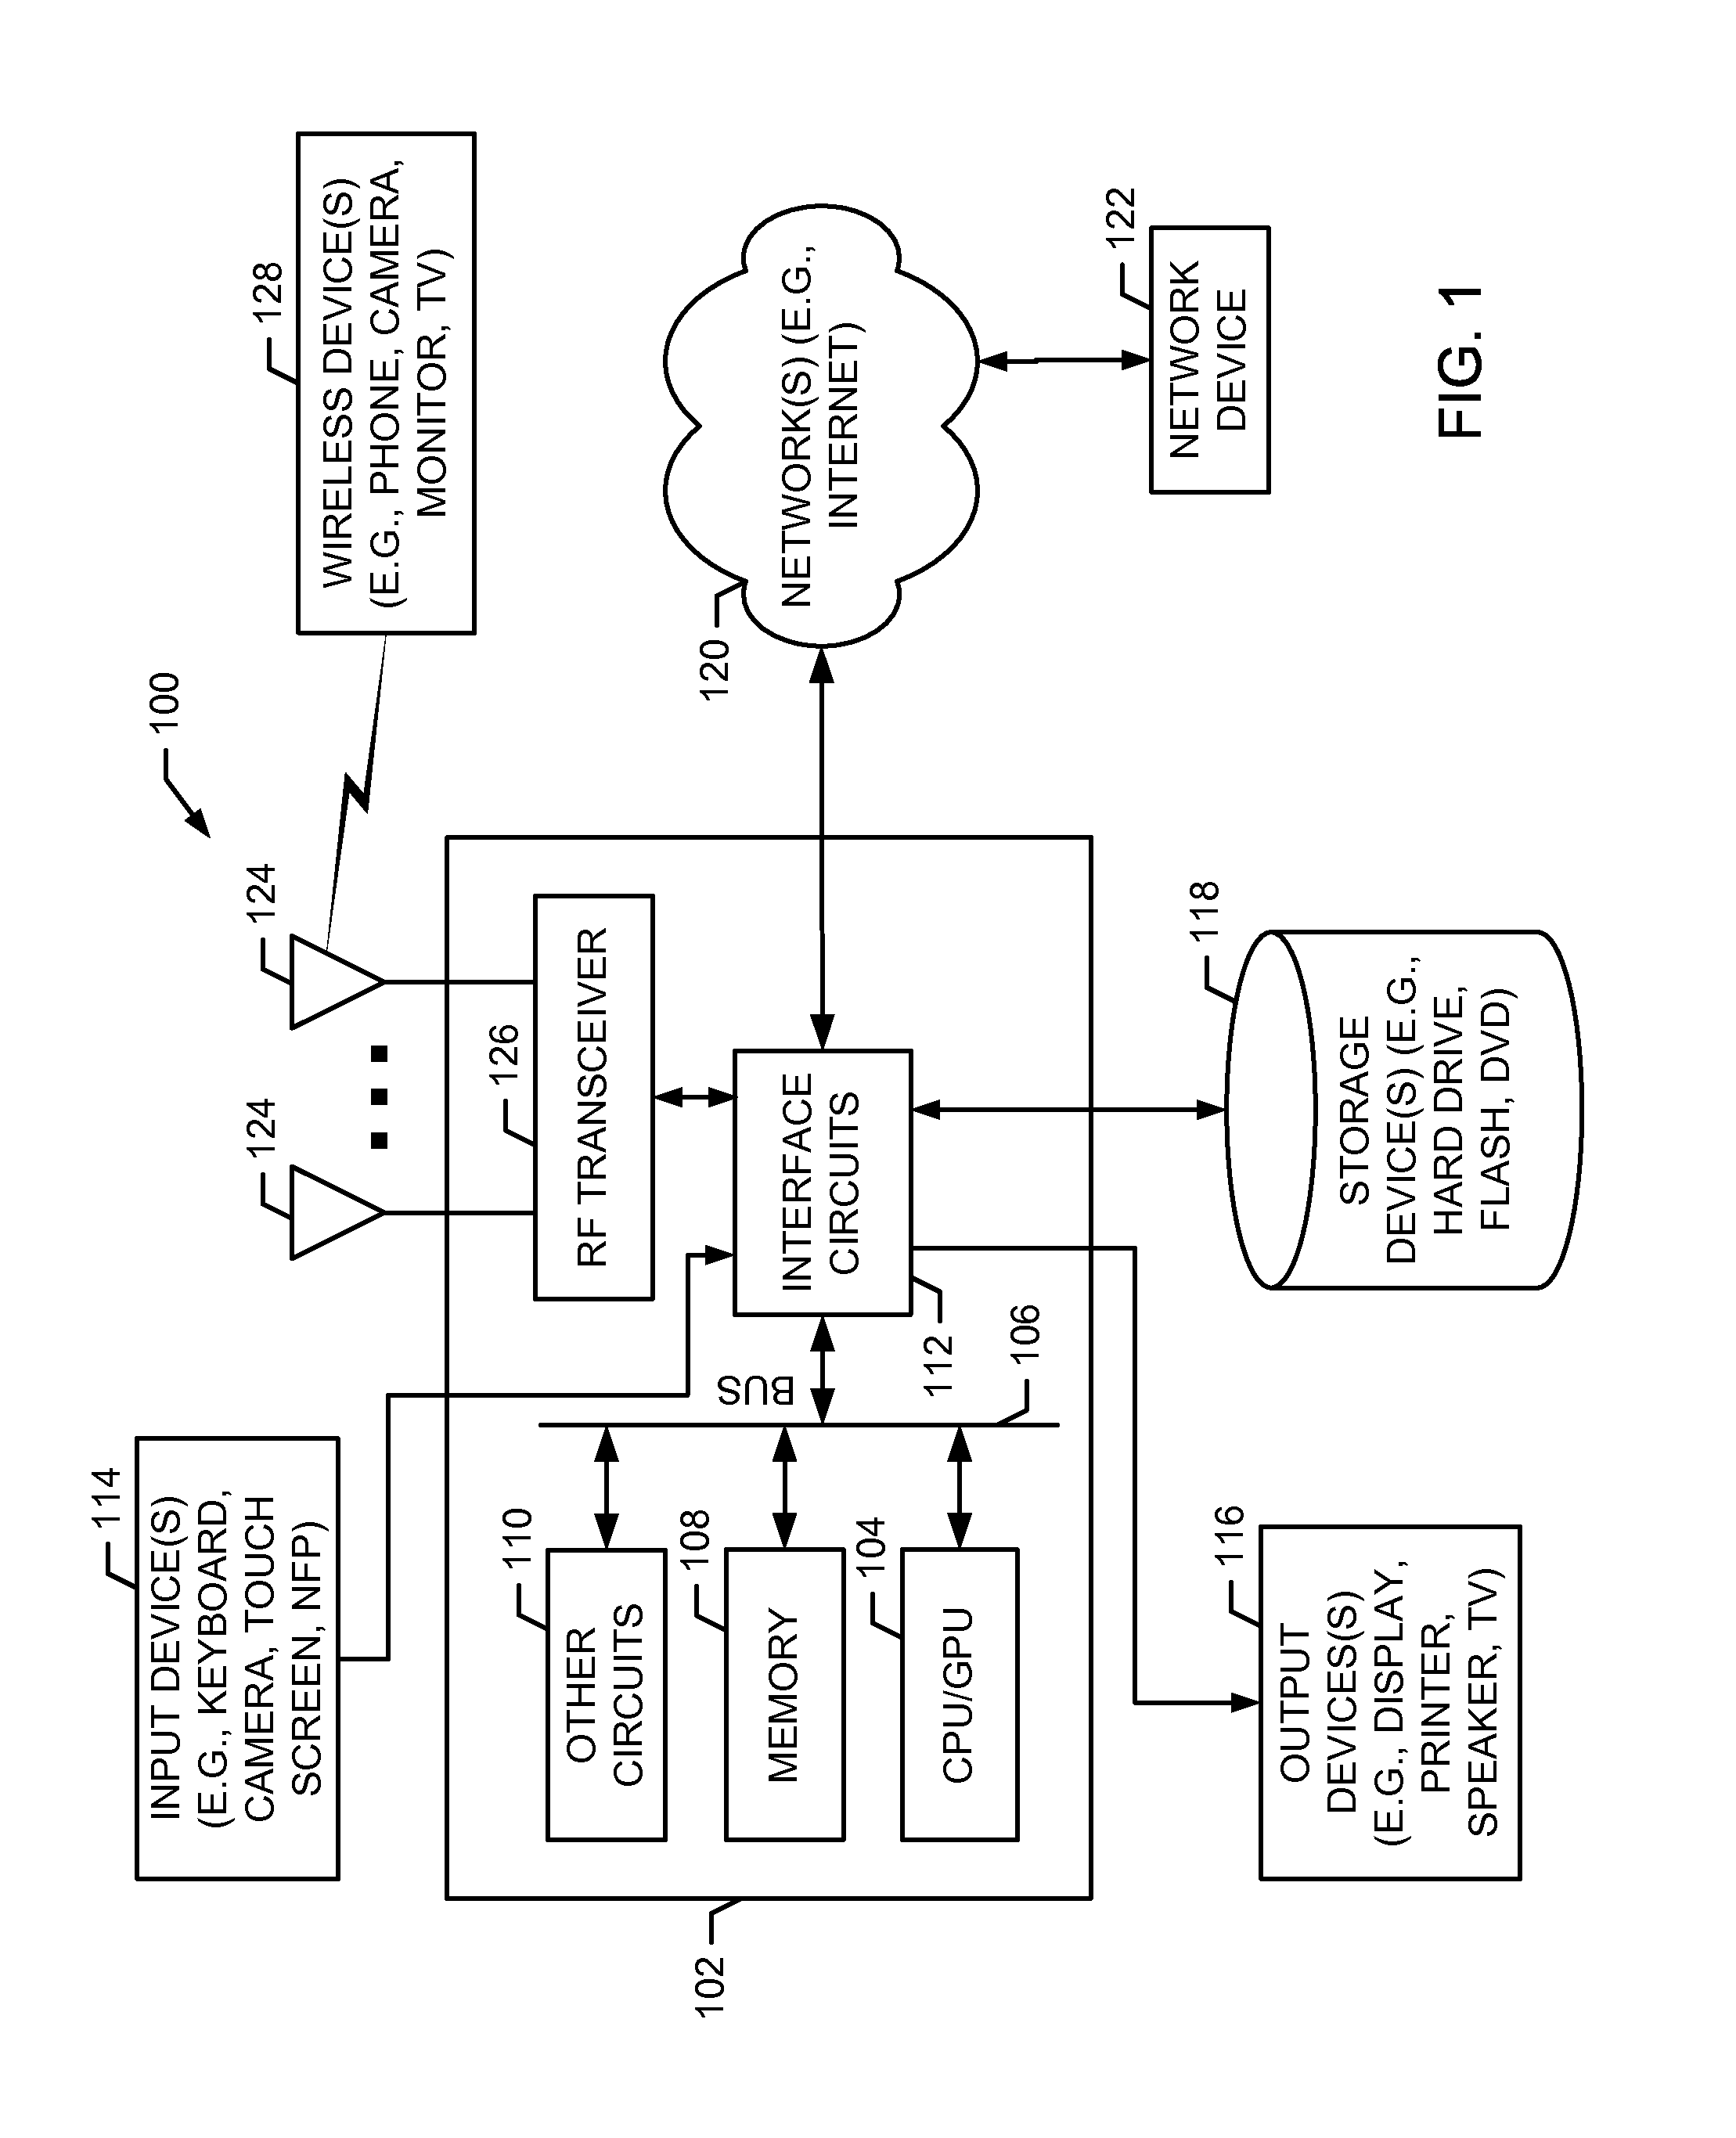 Methods and apparatus for dynamically adjusting a power level of an electronic device